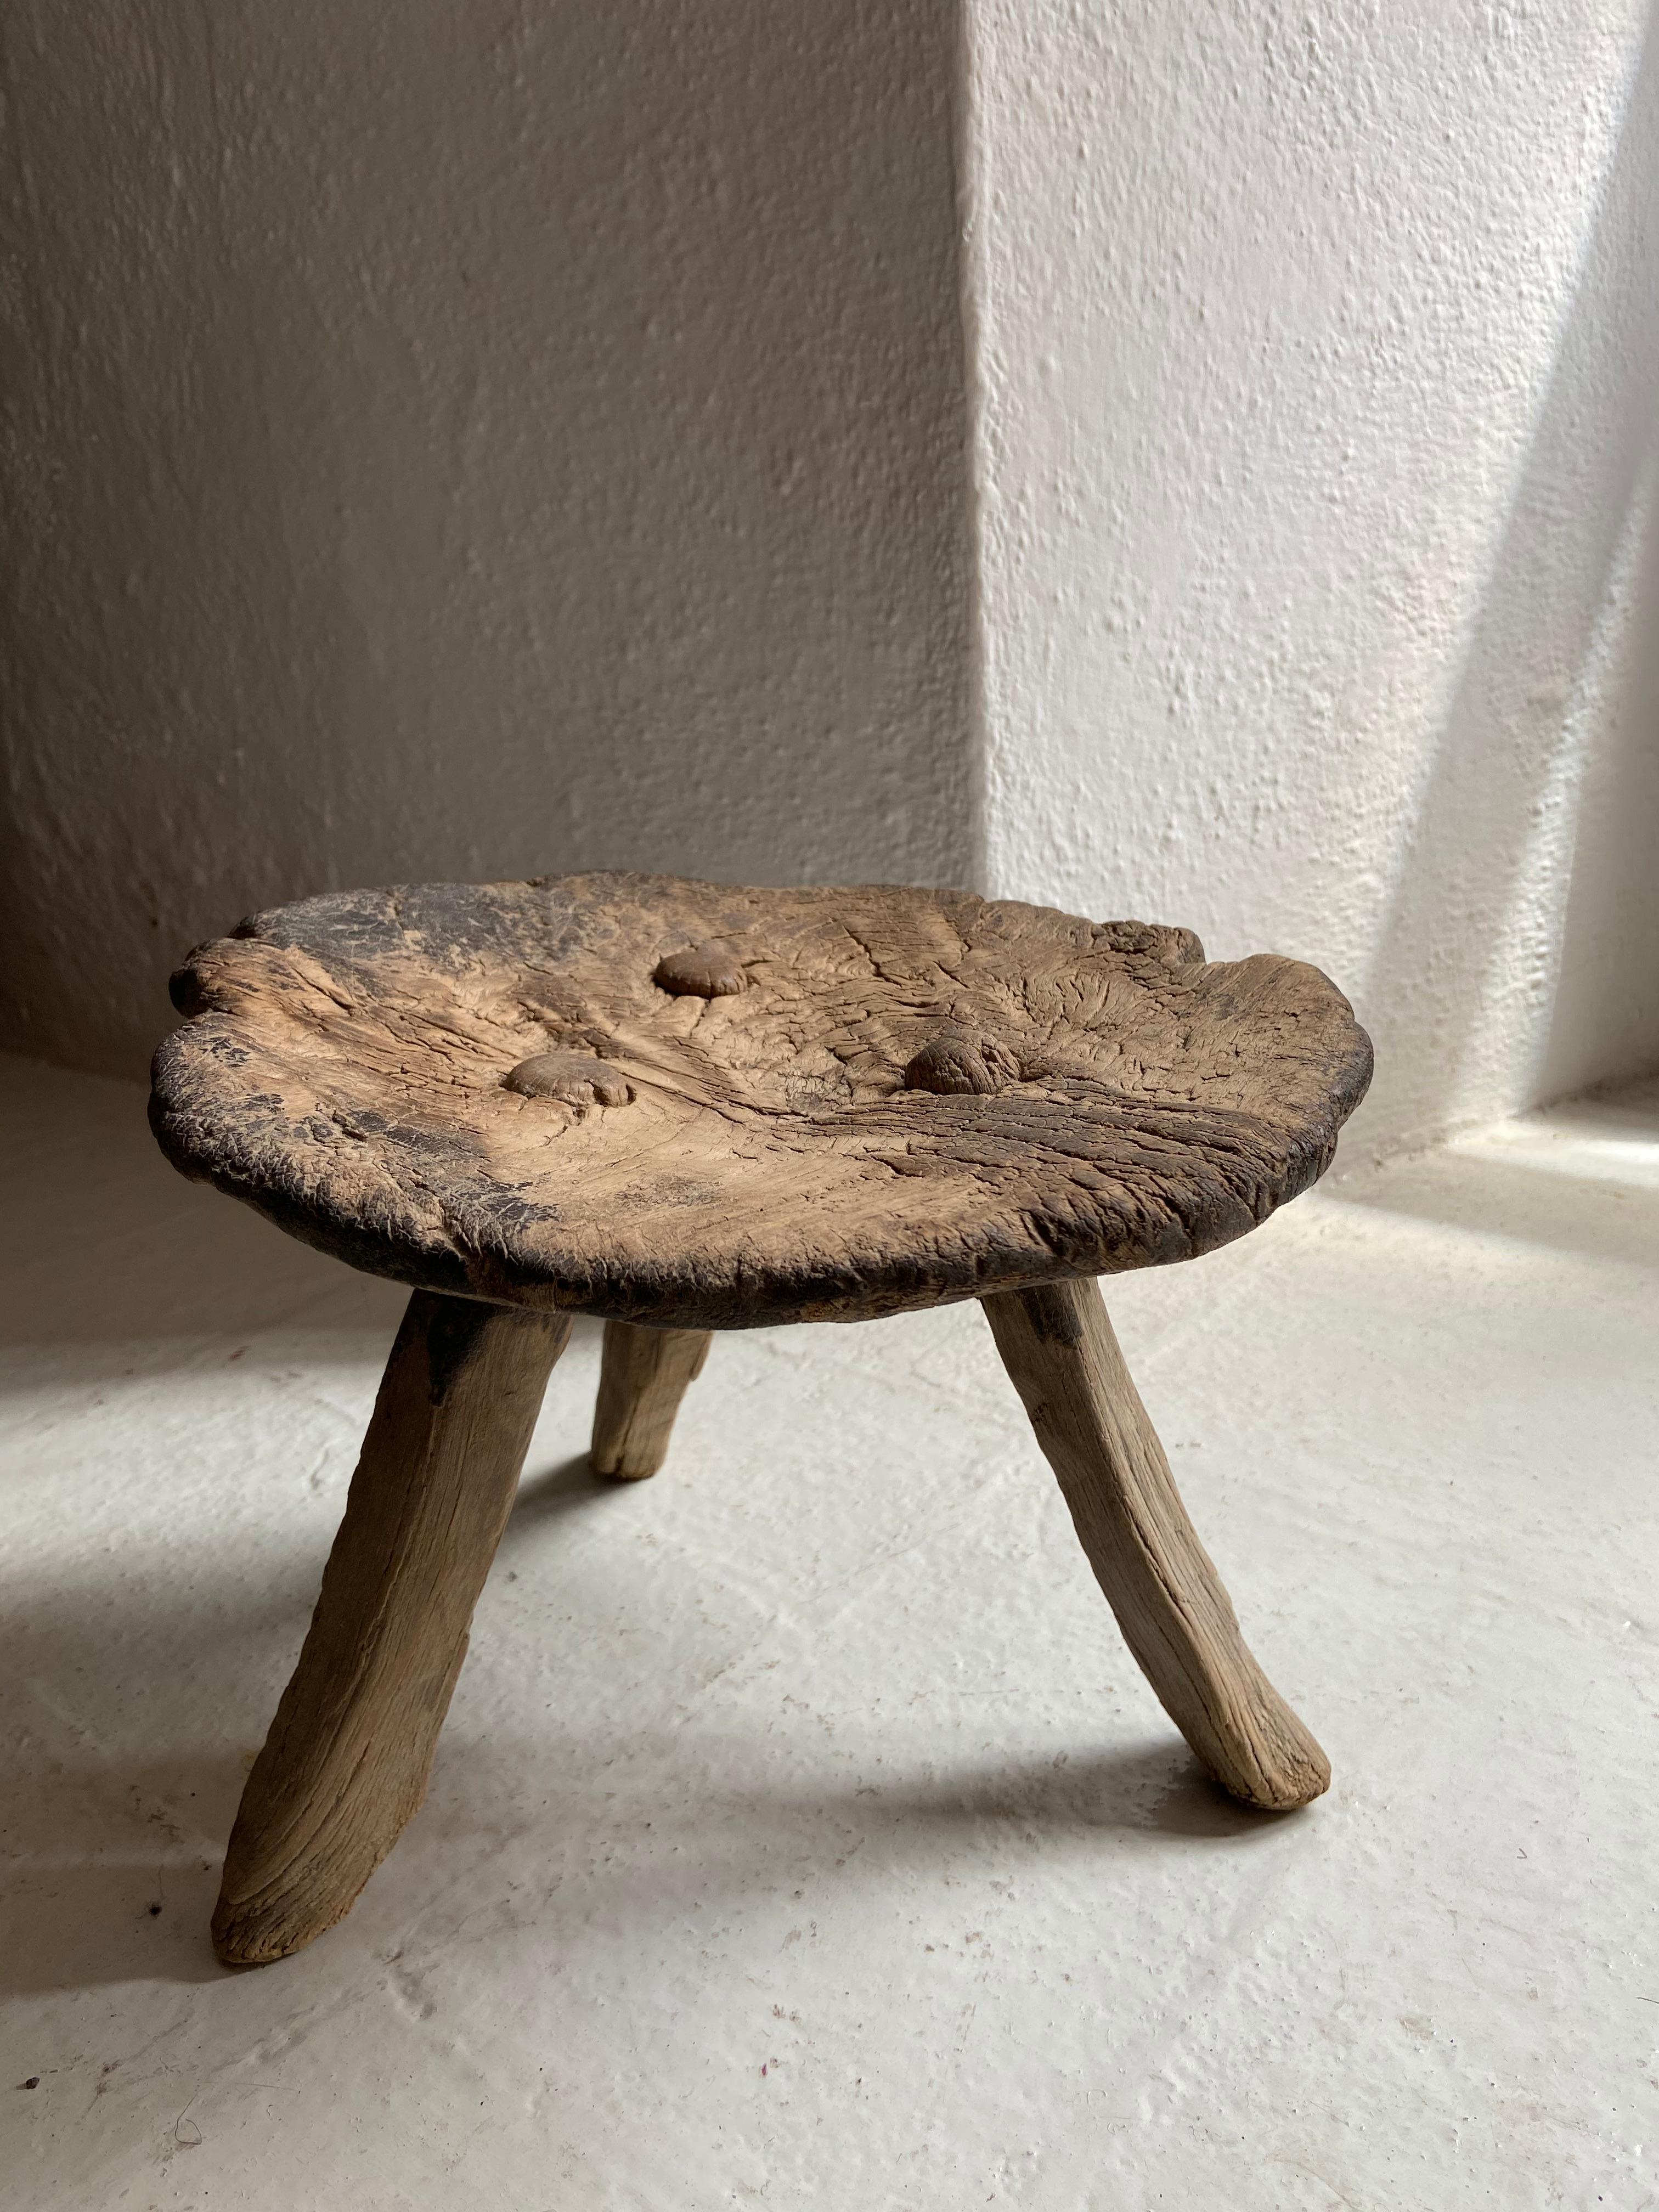 Early 20th Century Mesquite Stool from Mexico In Distressed Condition In San Miguel de Allende, Guanajuato